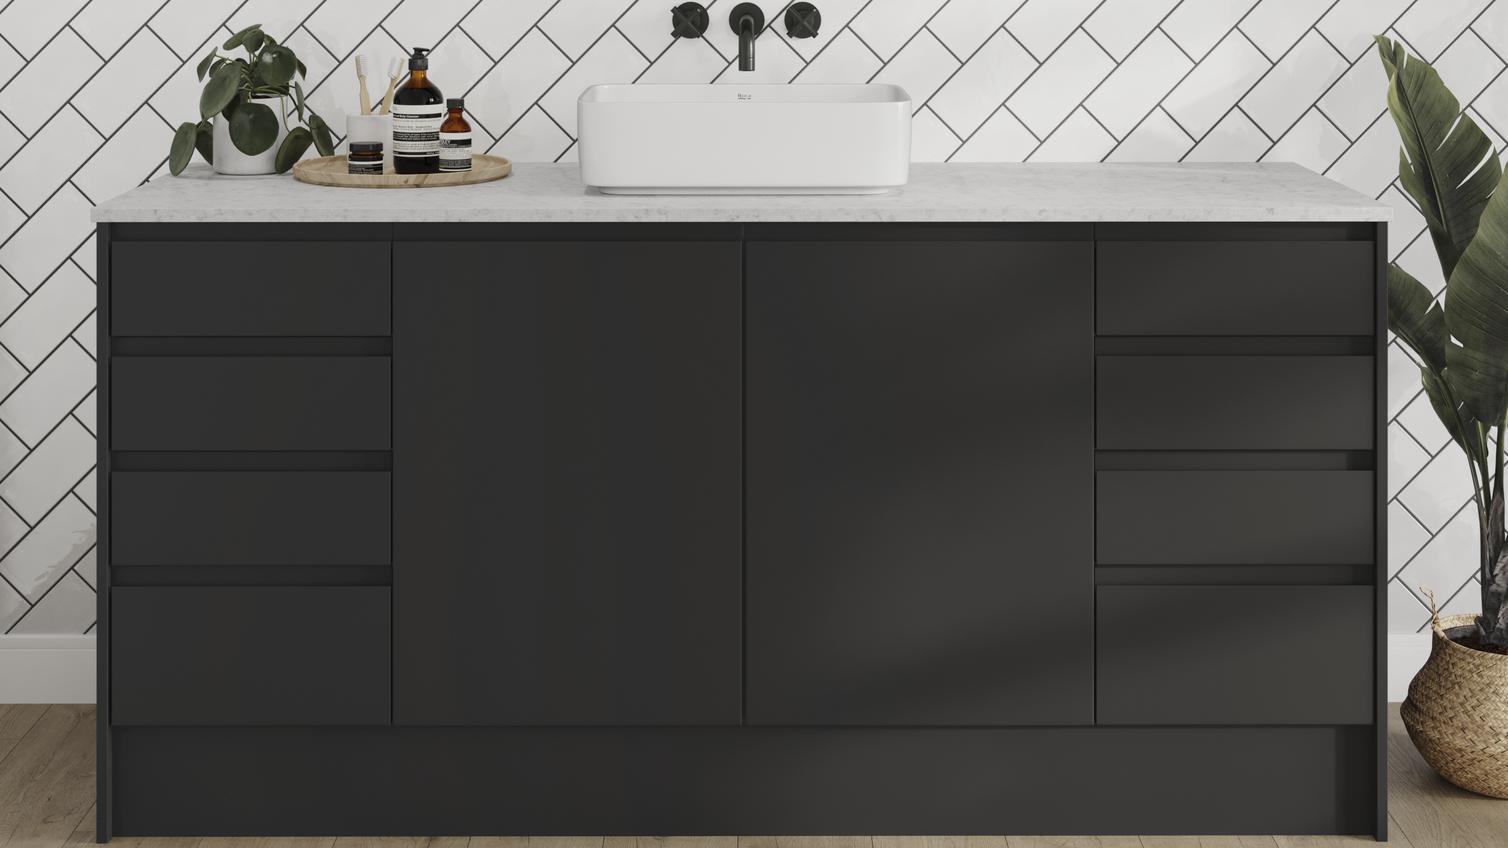 A modern bathroom idea featuring black, integrated handle cupboards. It includes white worktops, tiles, and timber floors.